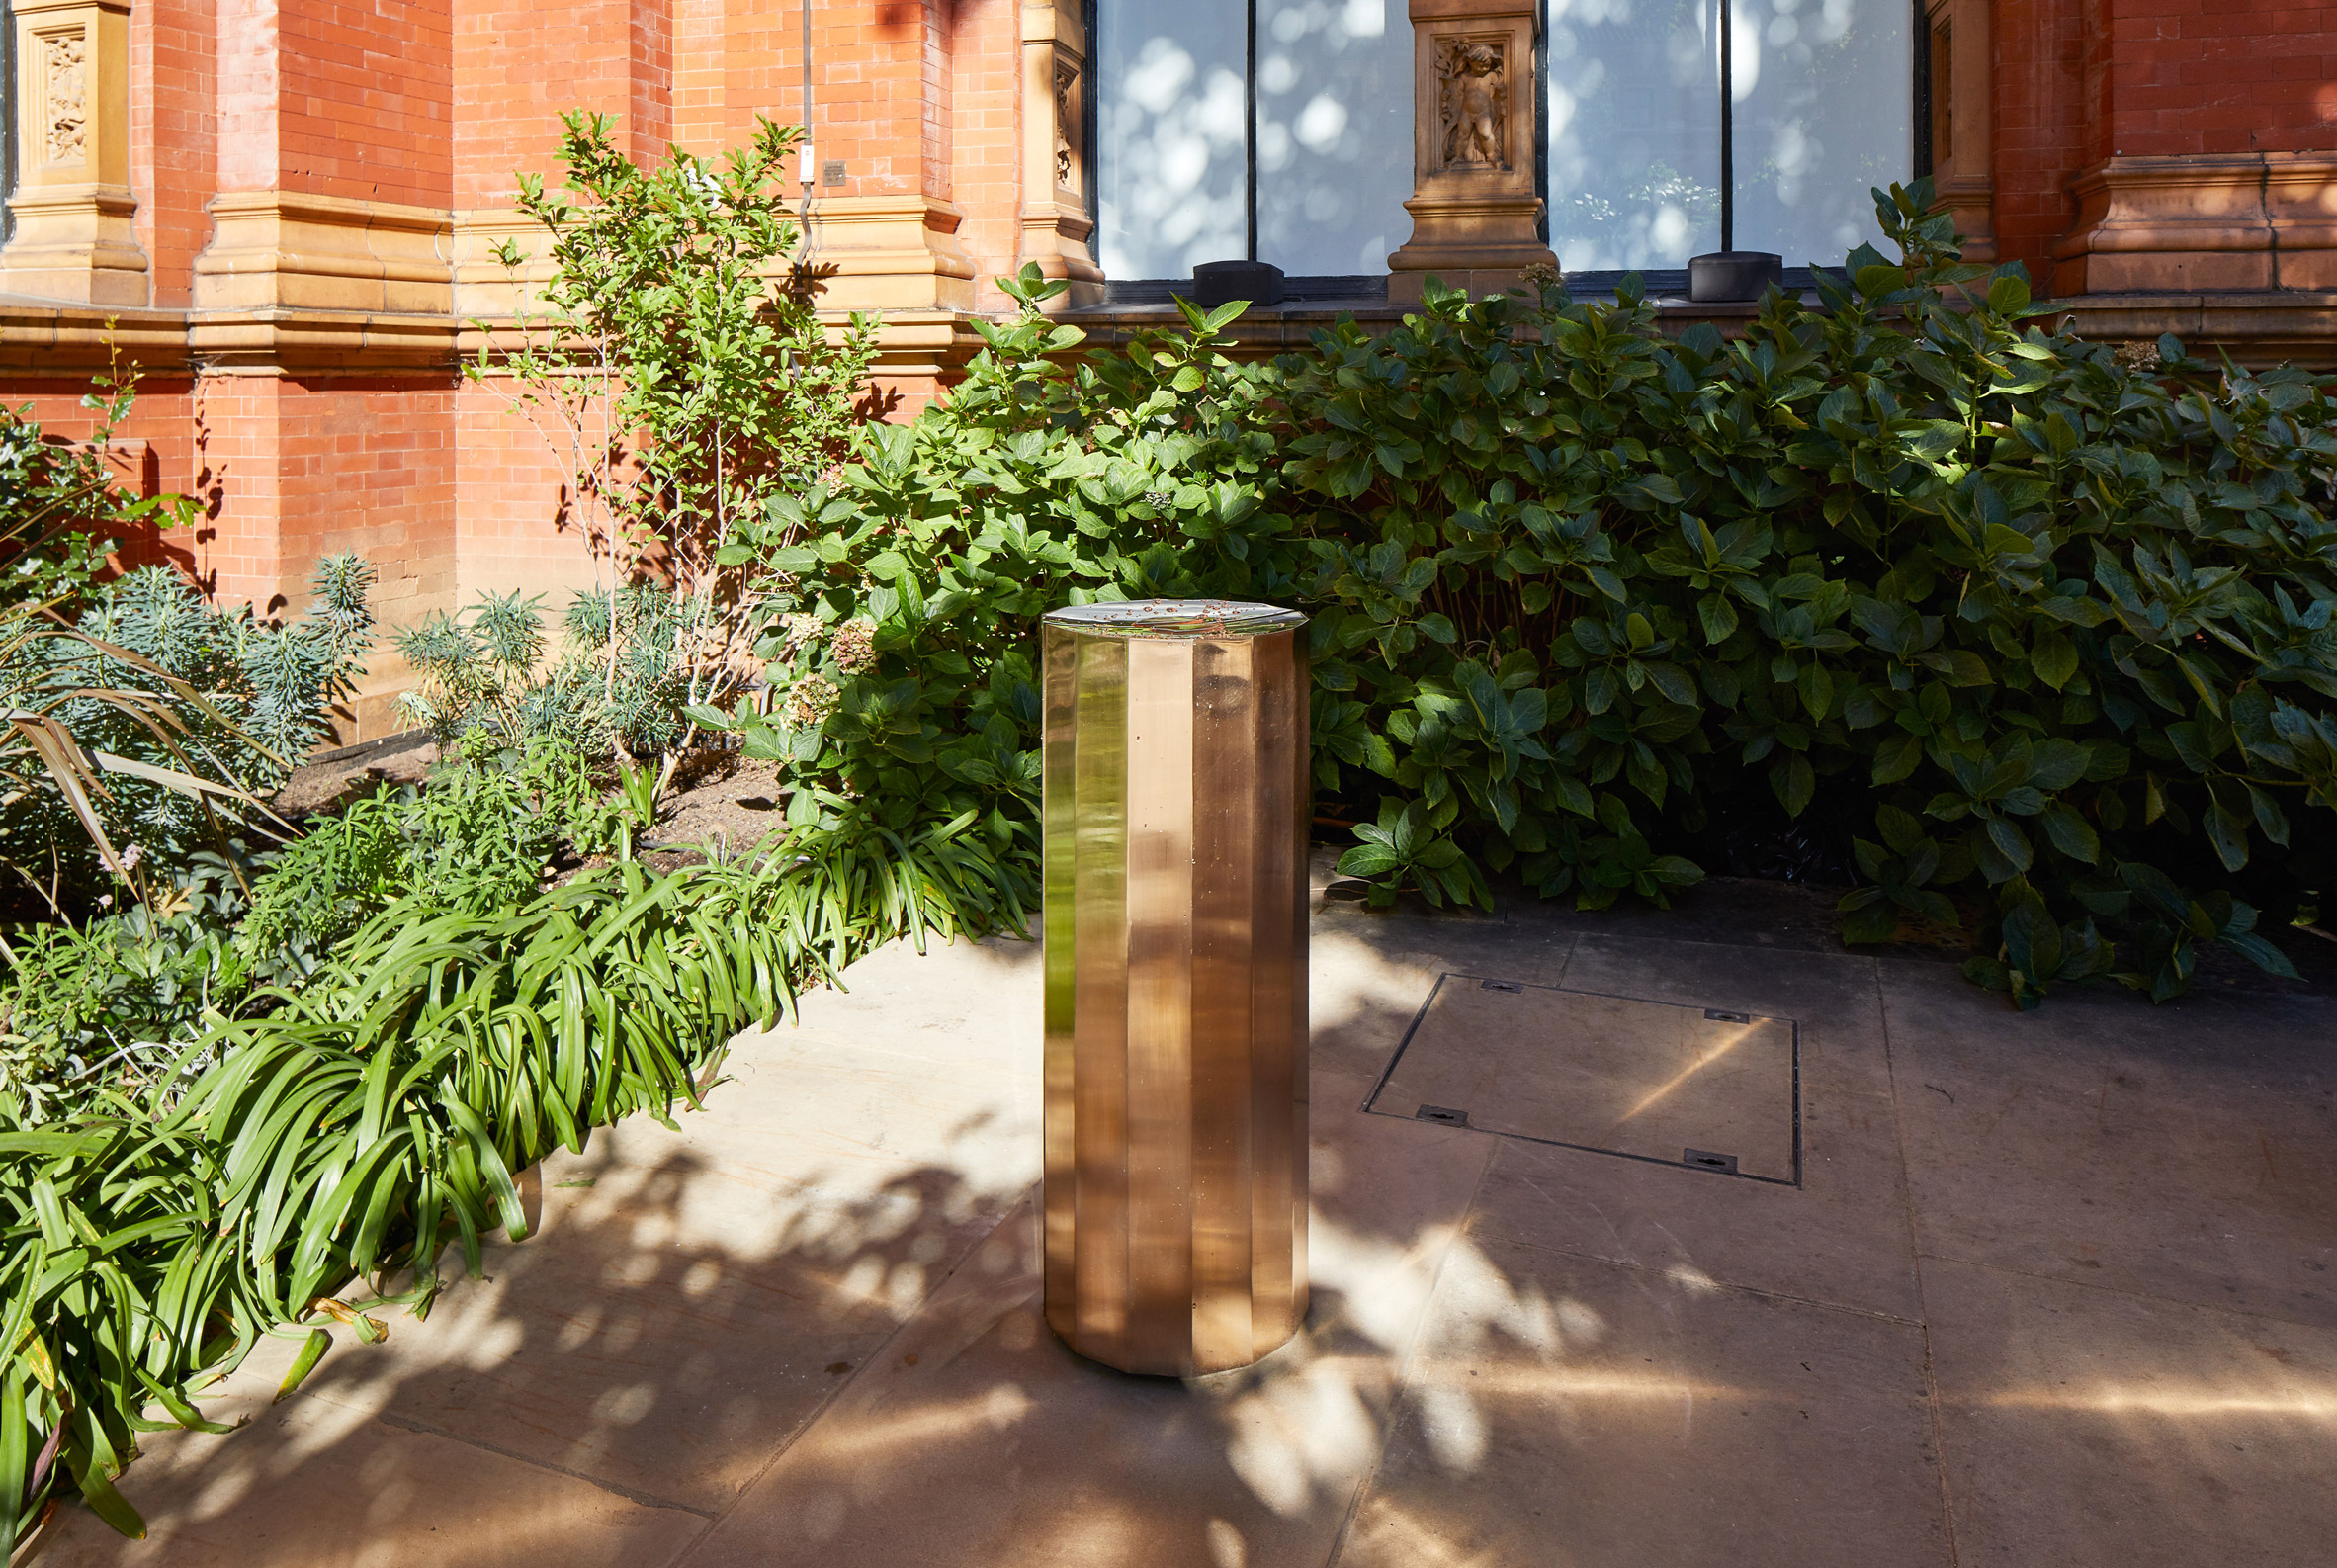 Michael Anastassiades installs drinking fountain that "lights up your whole face" at the V&A